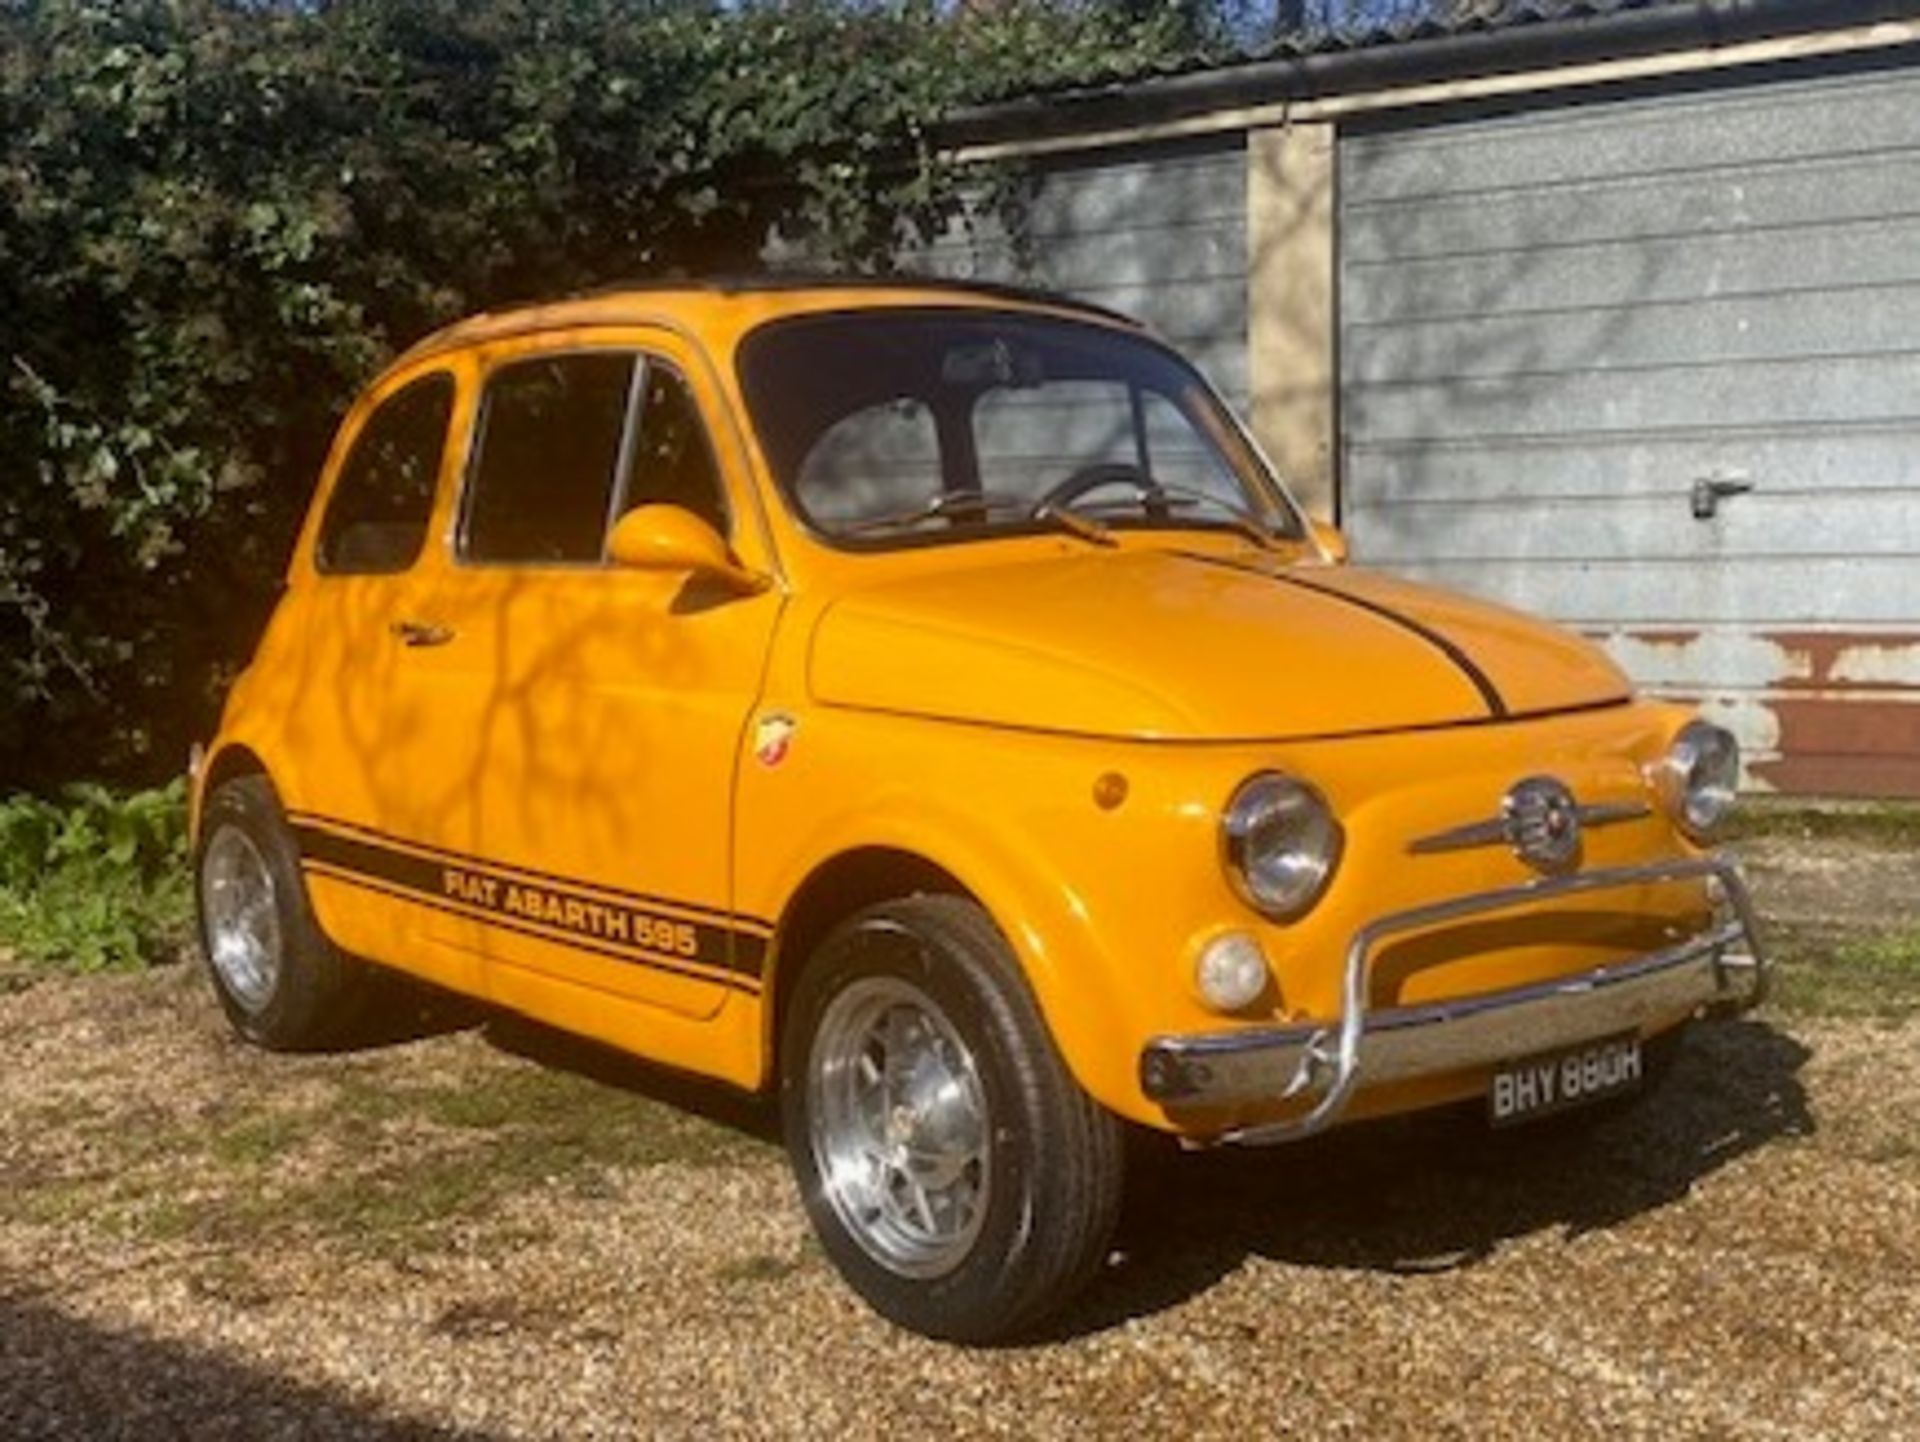 1969 Fiat 500 Abarth Evocation LHD - Image 3 of 9